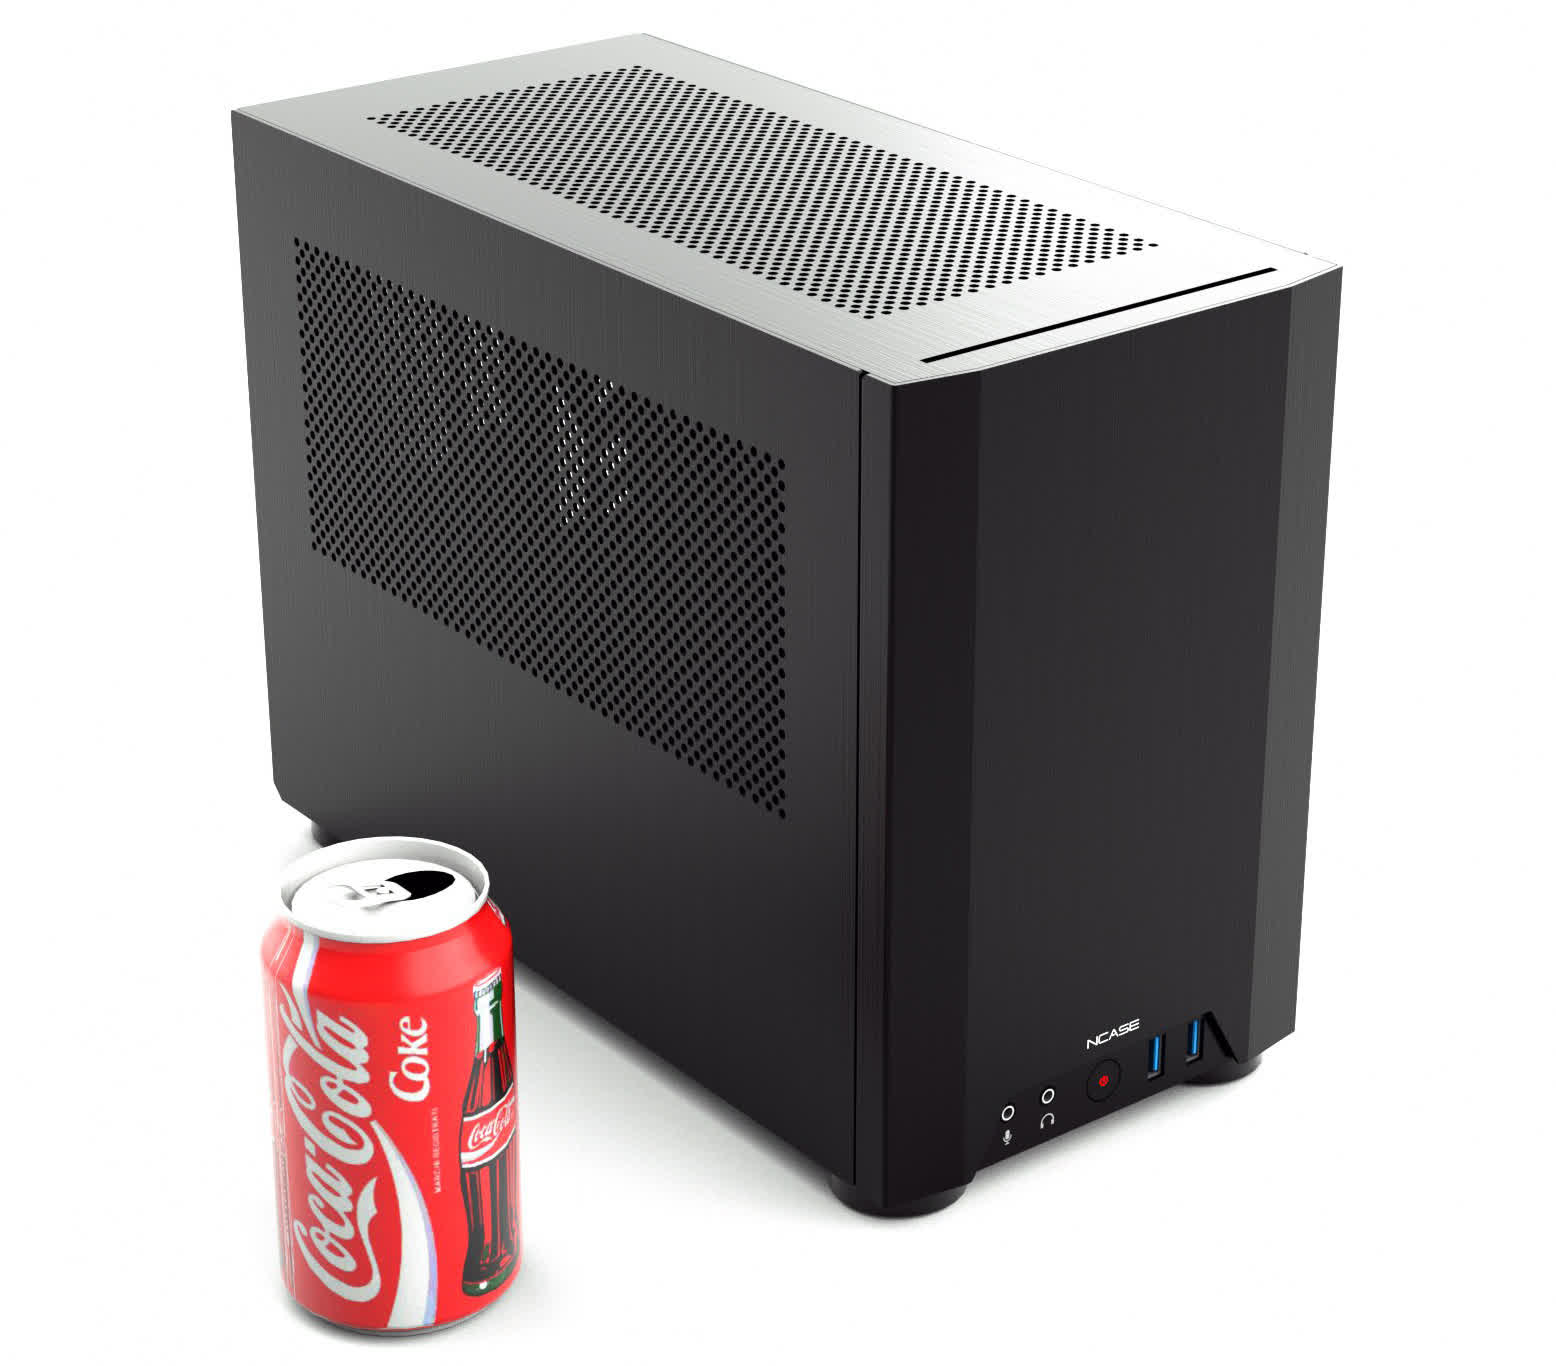 Ncase discontinues its excellent M1 small form factor PC chassis after eight years